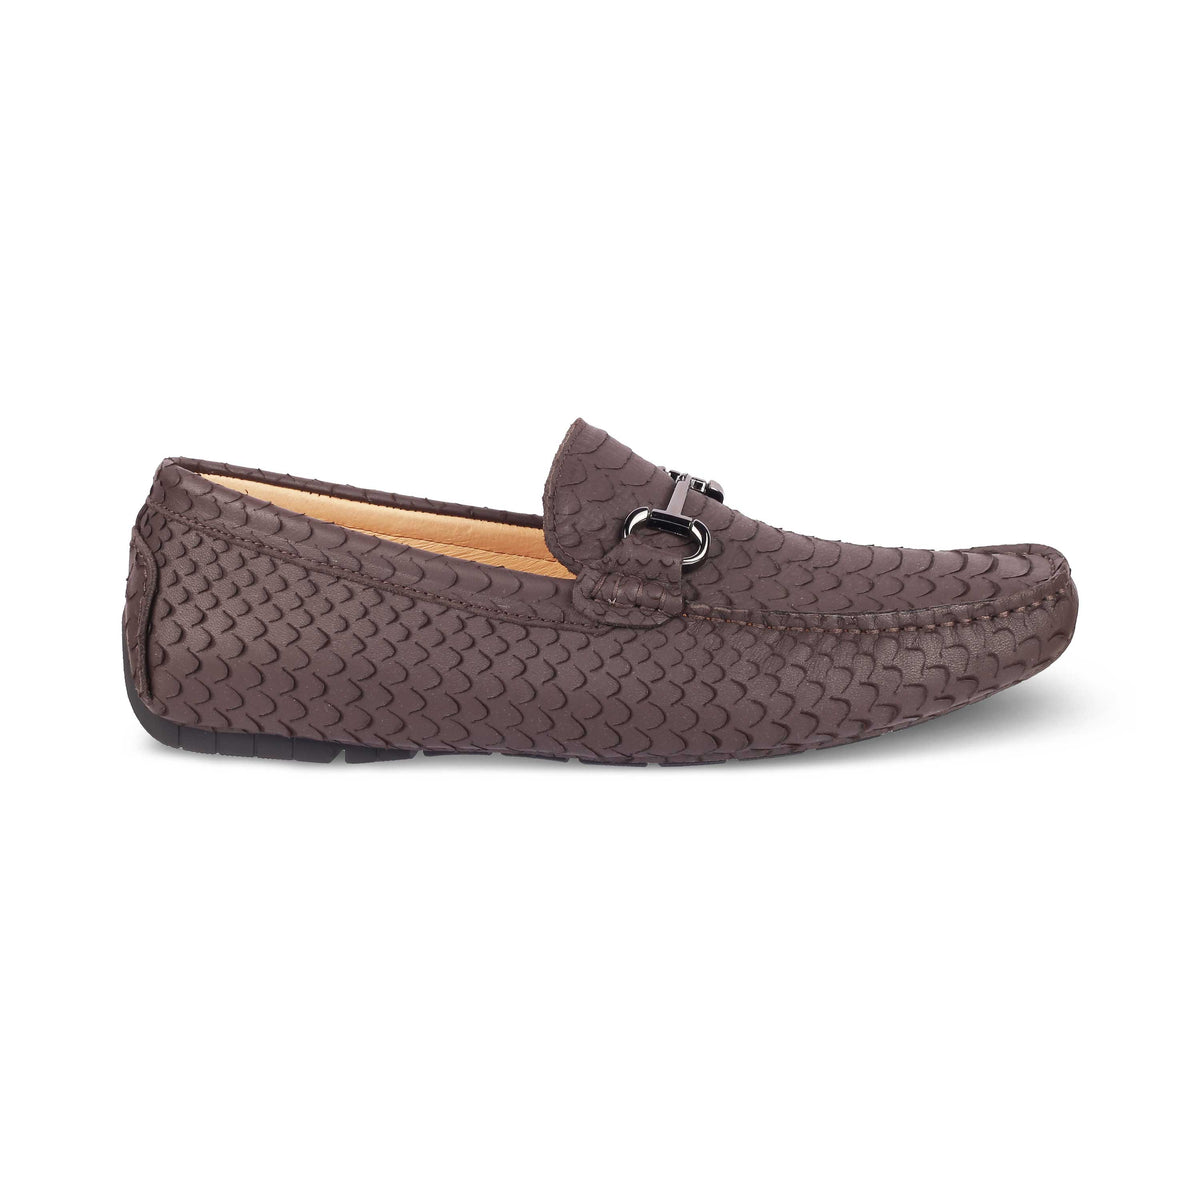 Tresmode Sofi Brown Men's Leather Driving Loafers - Tresmode